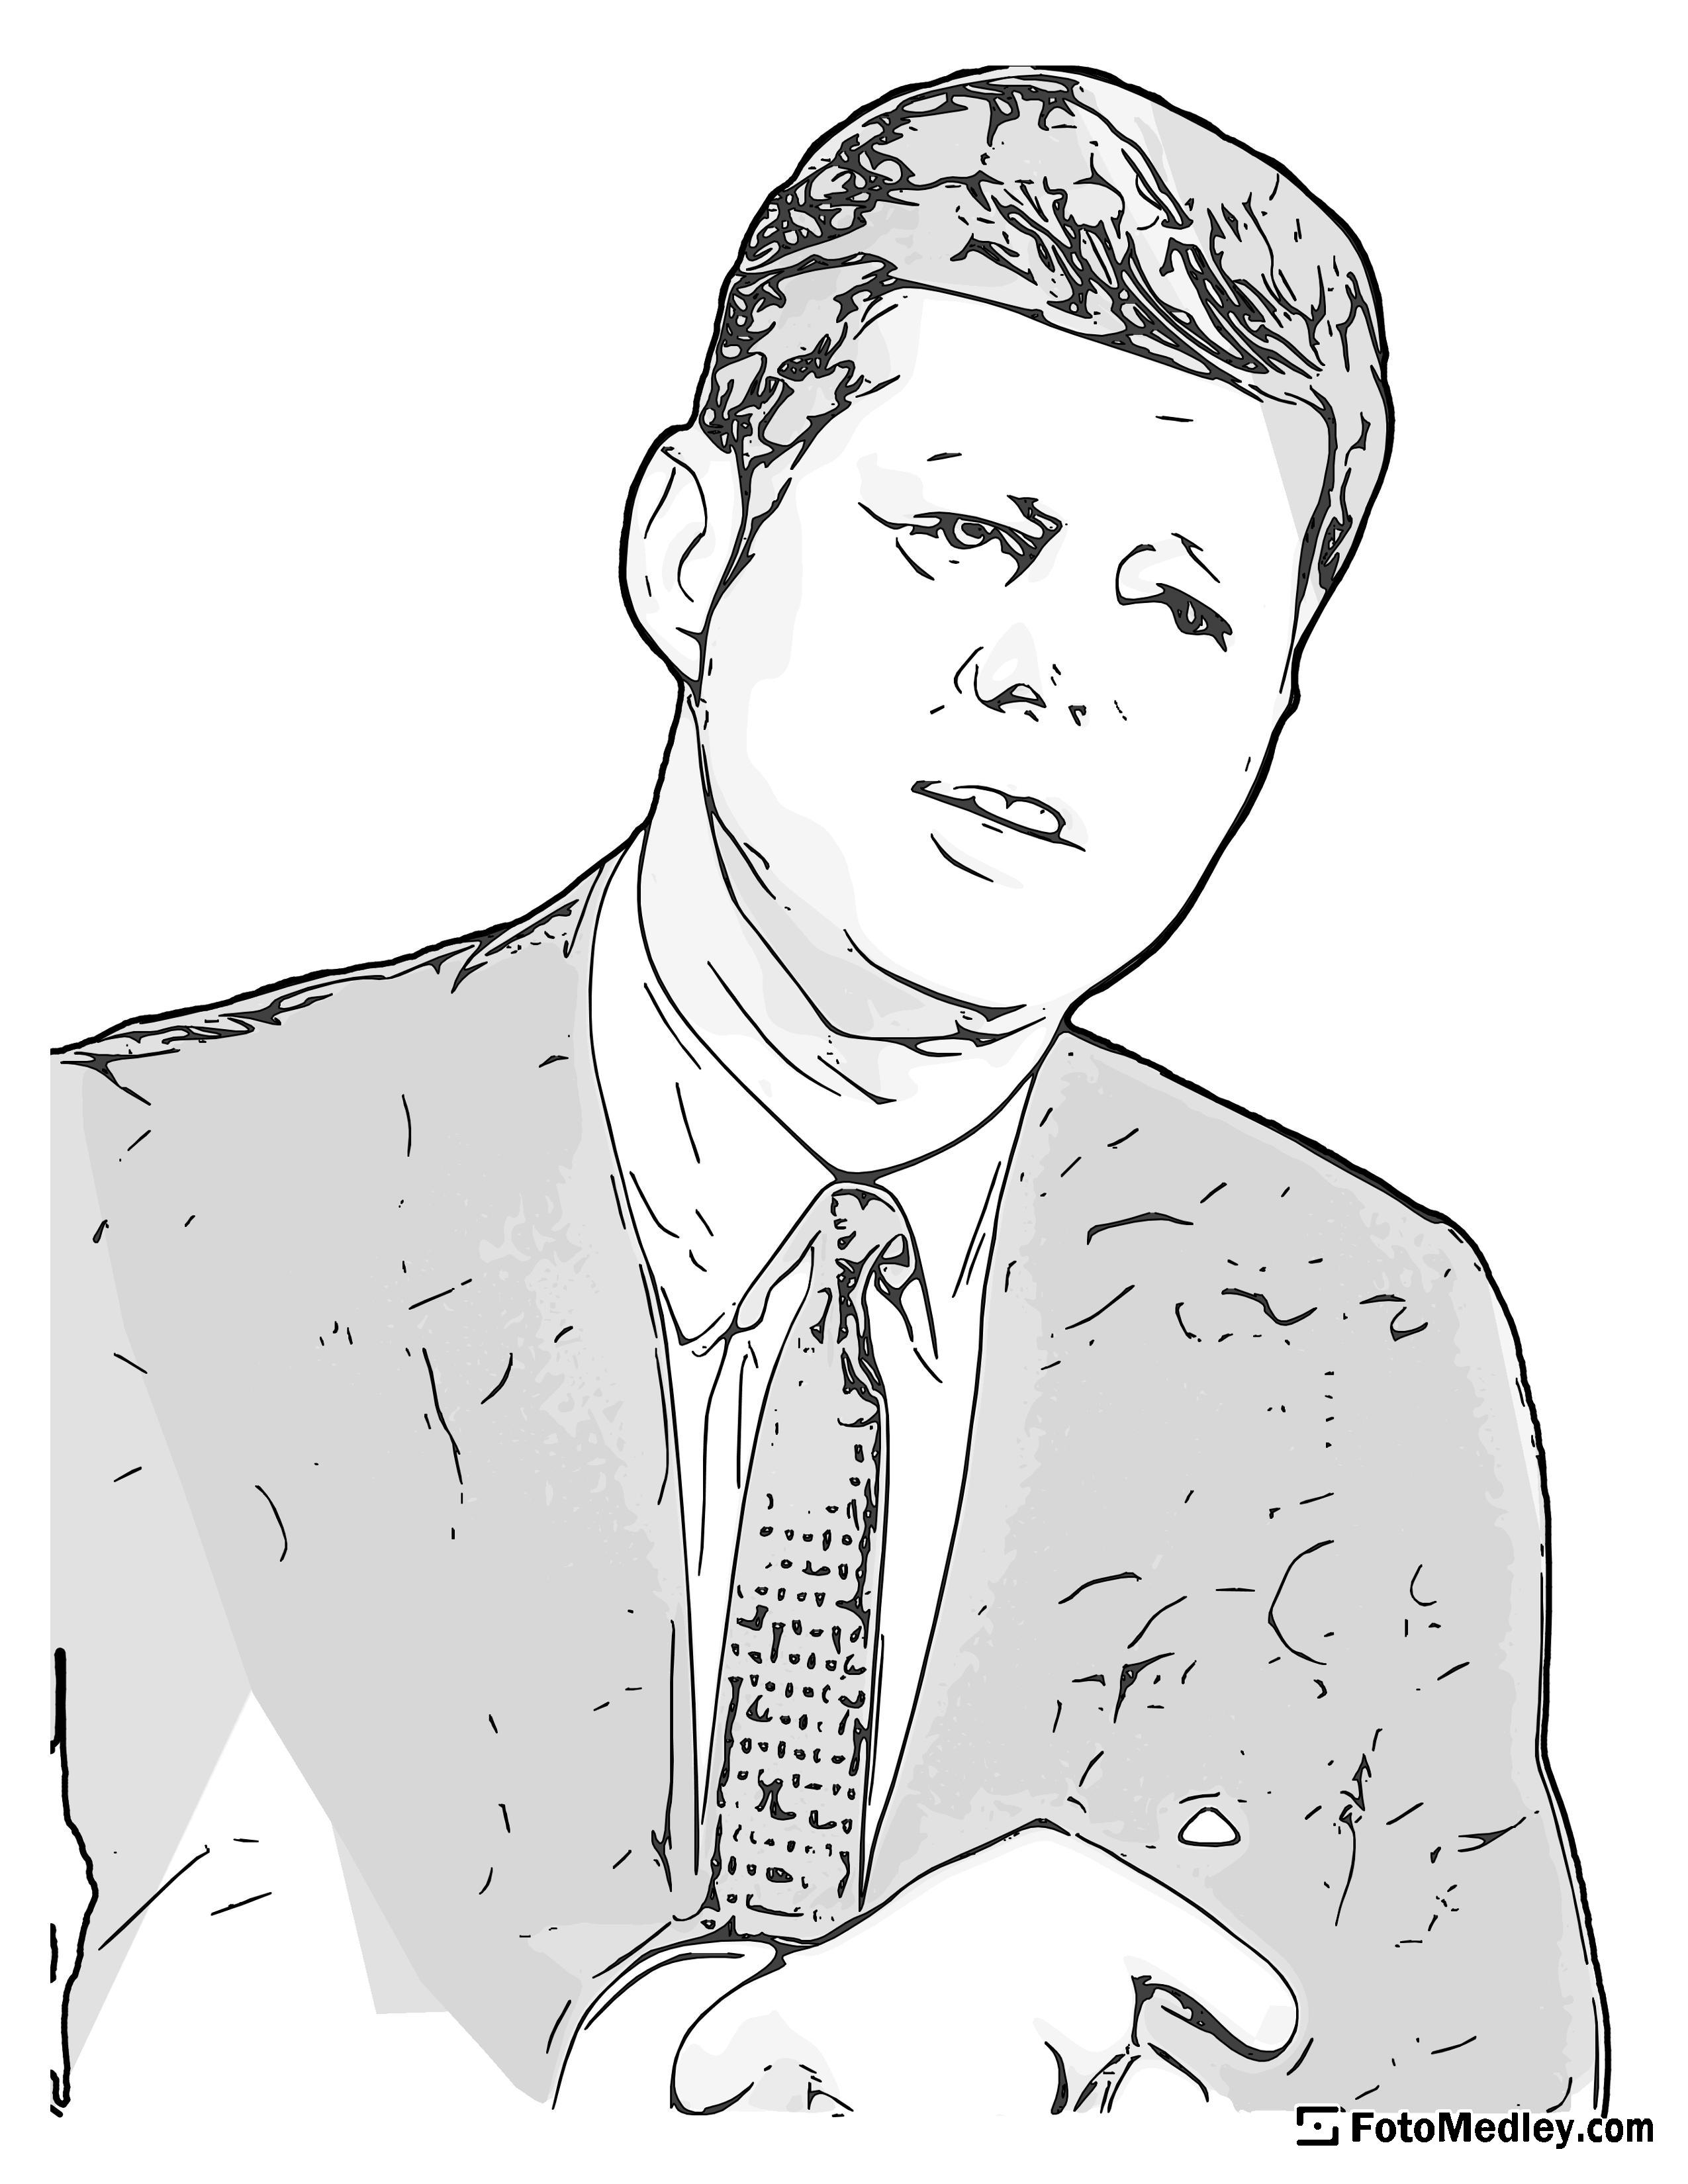 A cartoon style coloring sketch of John F. Kennedy, 35th President of the United States.